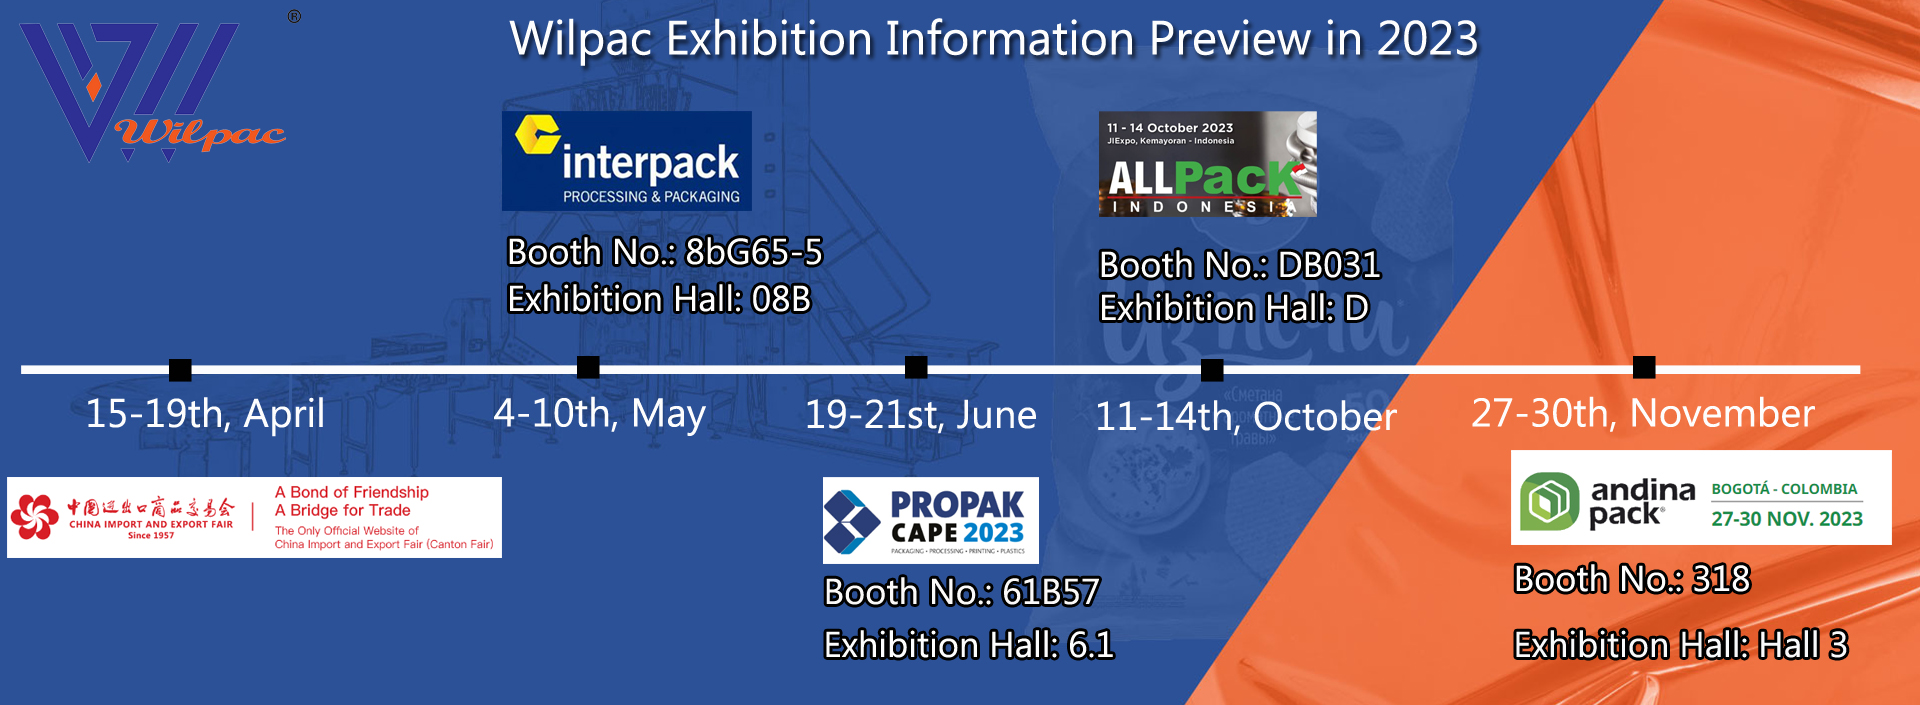 Wilpac Exhibition Information for 2023 